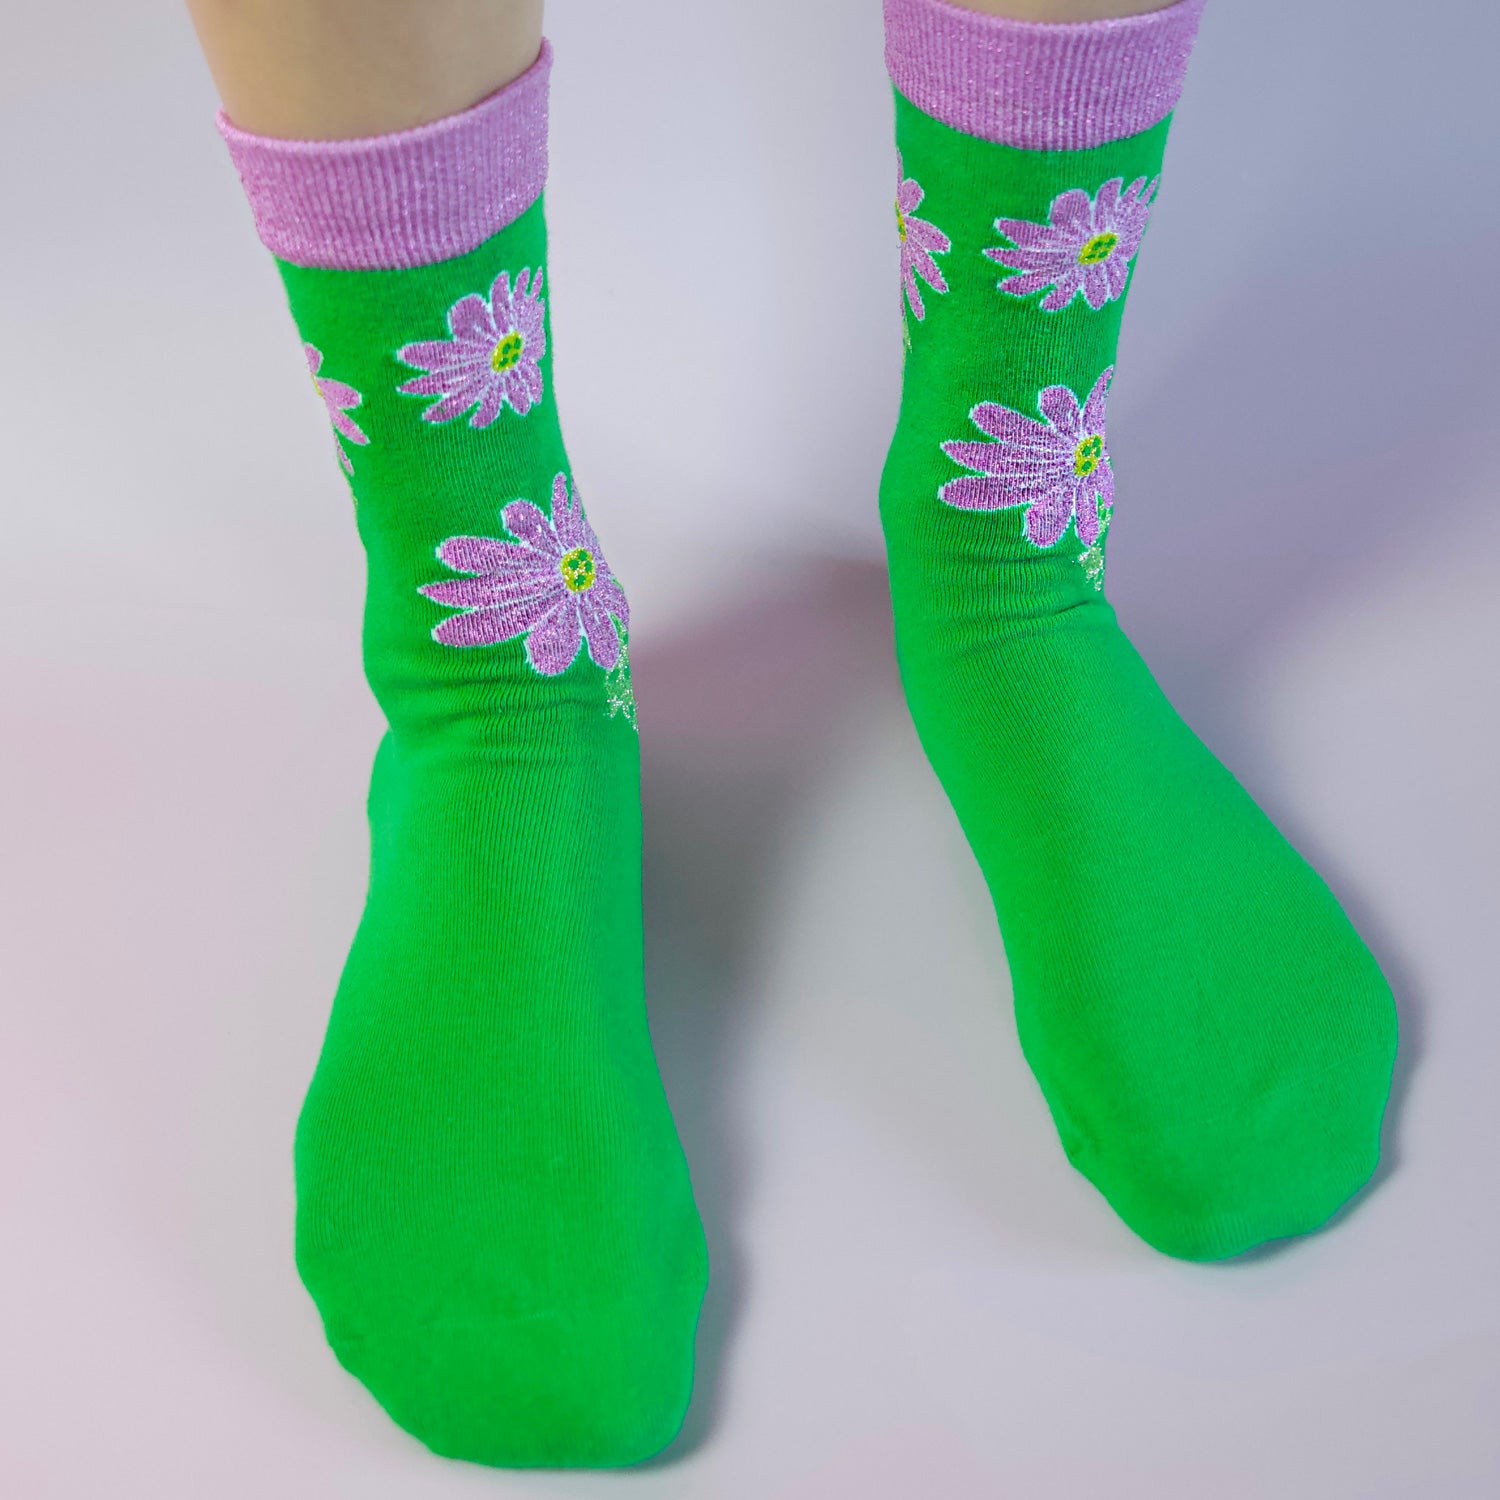 green cotton flower socks with purple flowers with sparkly metallic yarn